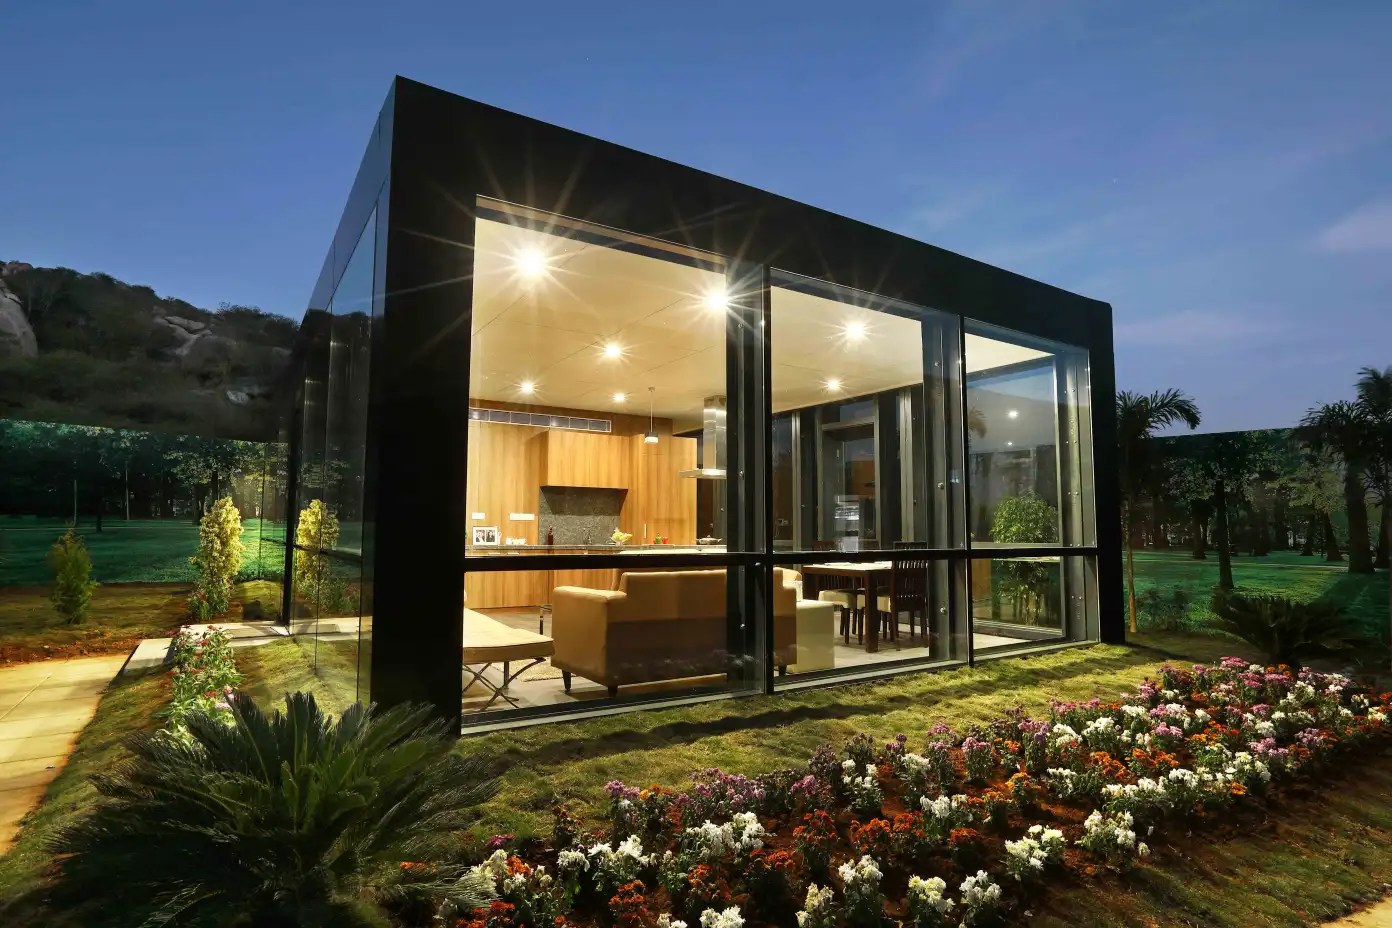 How “Revolution Precrafted” Revolutionized The Prefab Home Industry